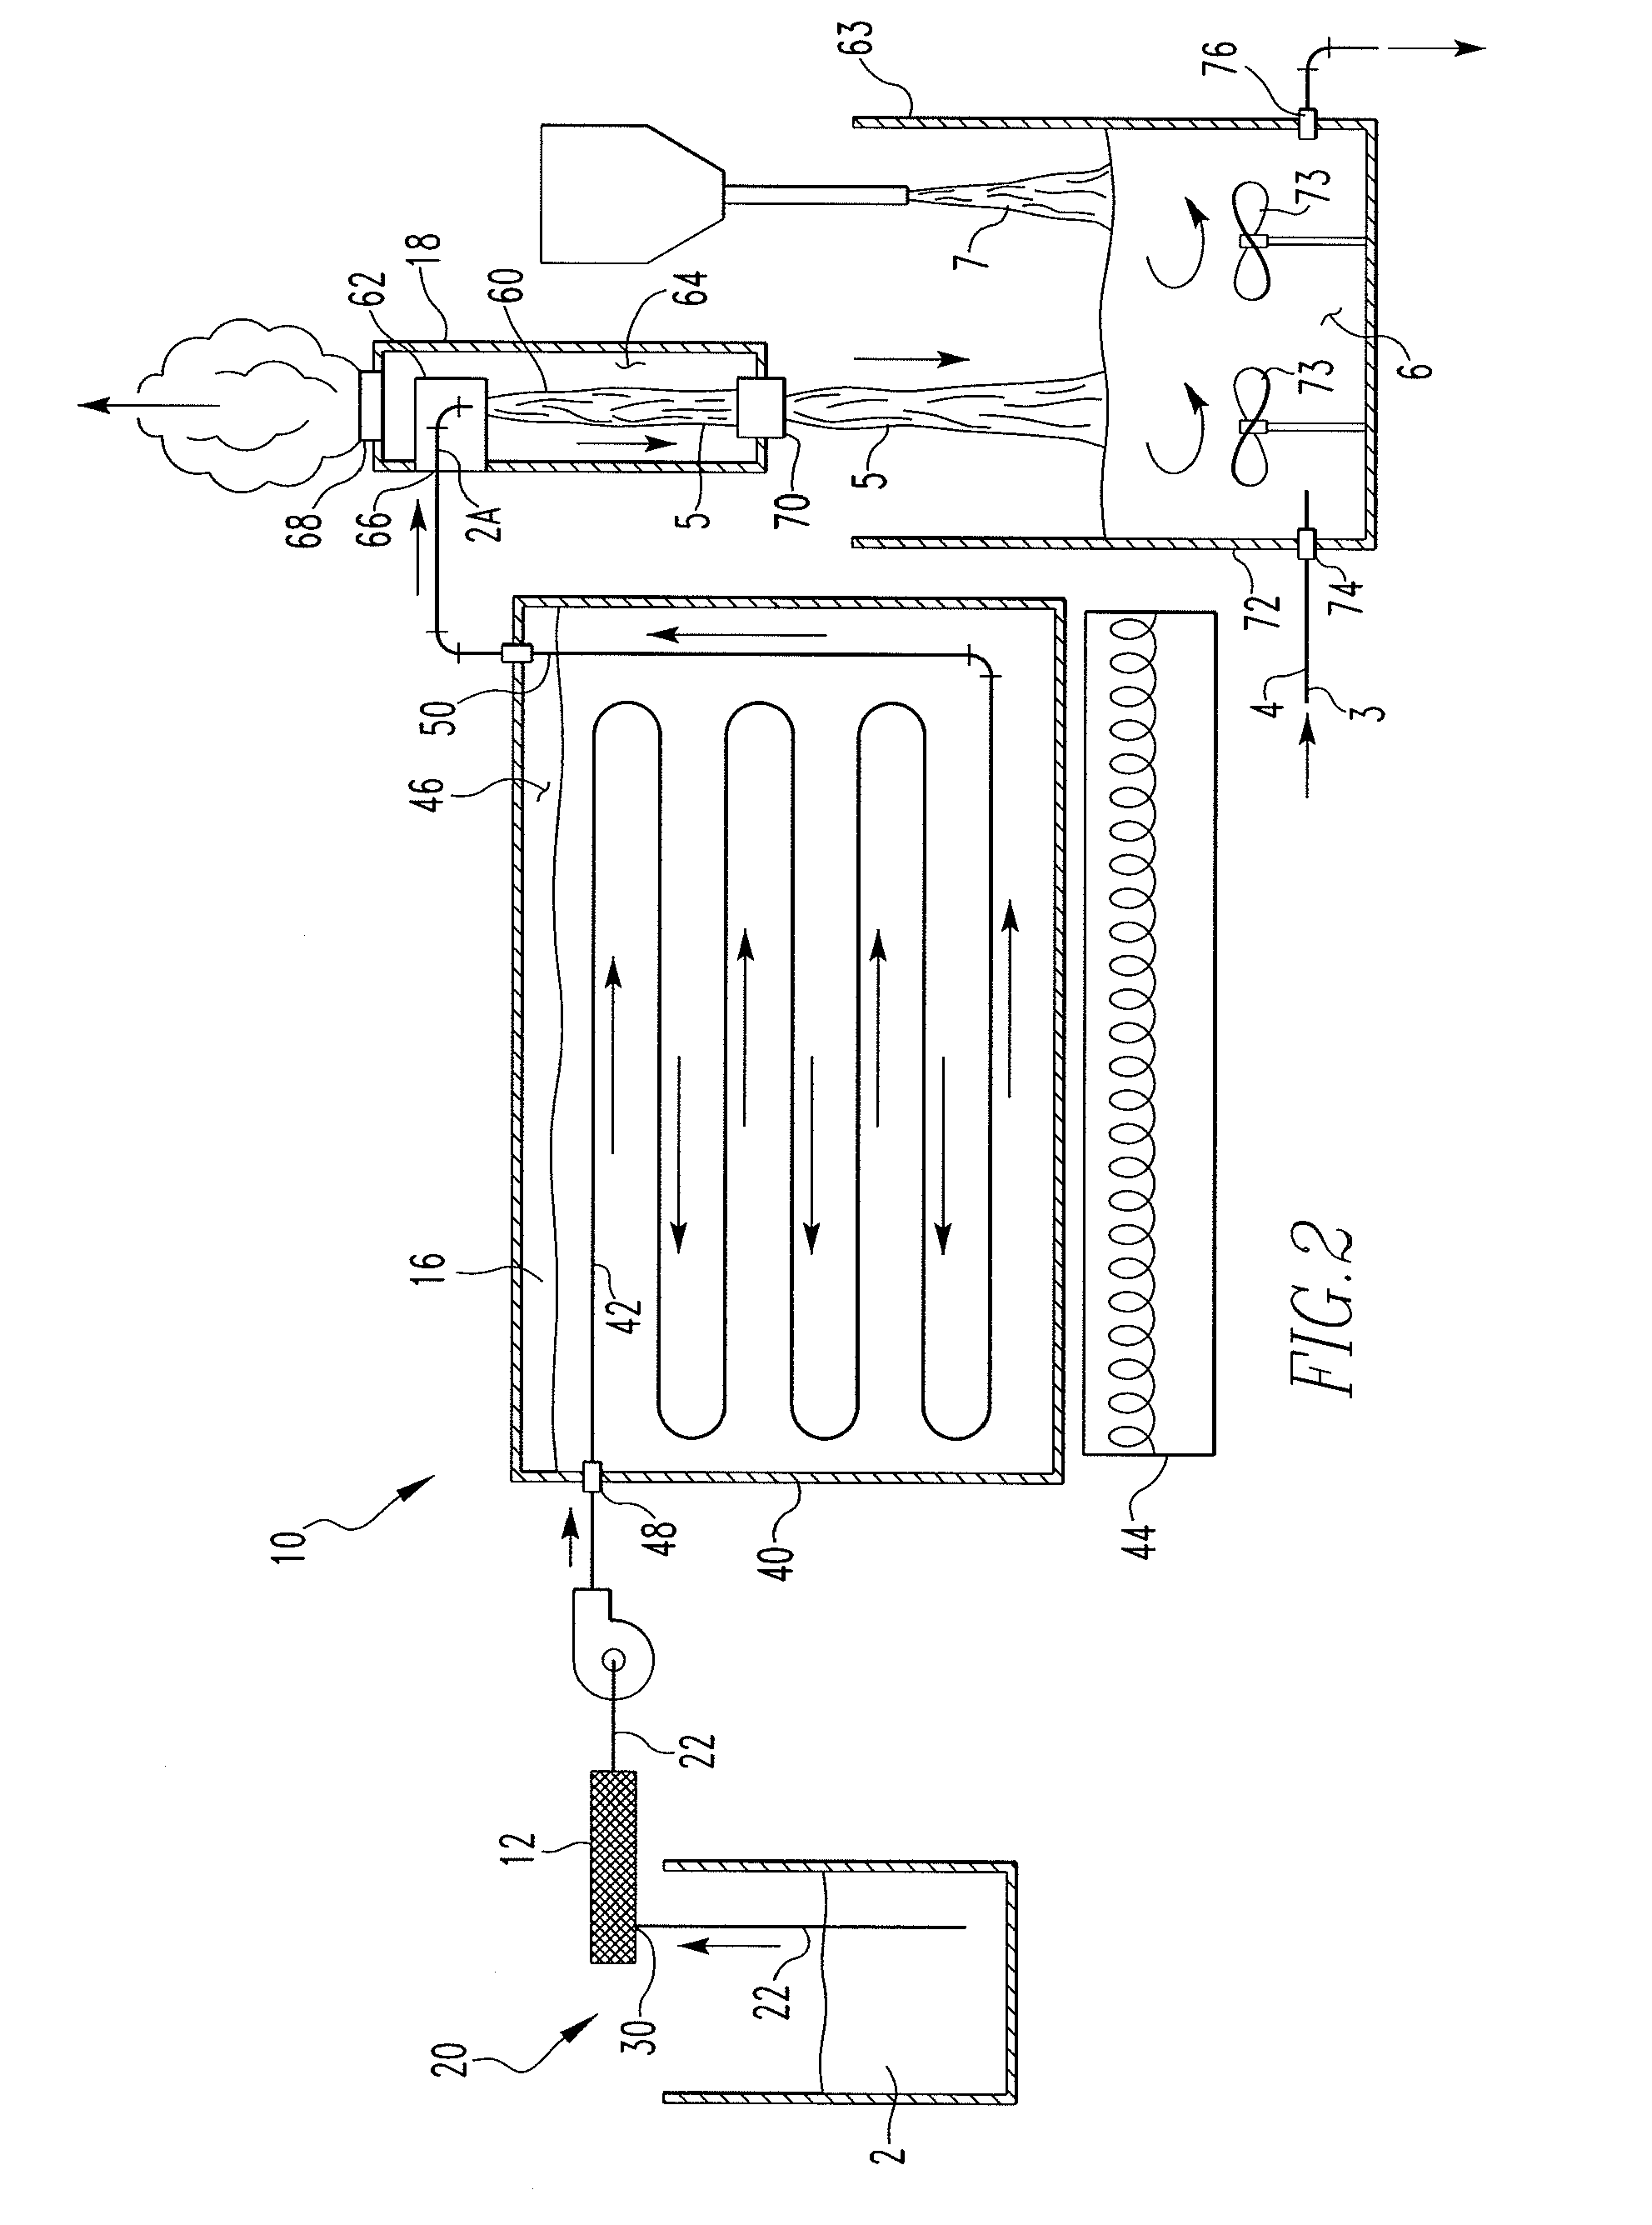 Smoke ink and method of manufacture